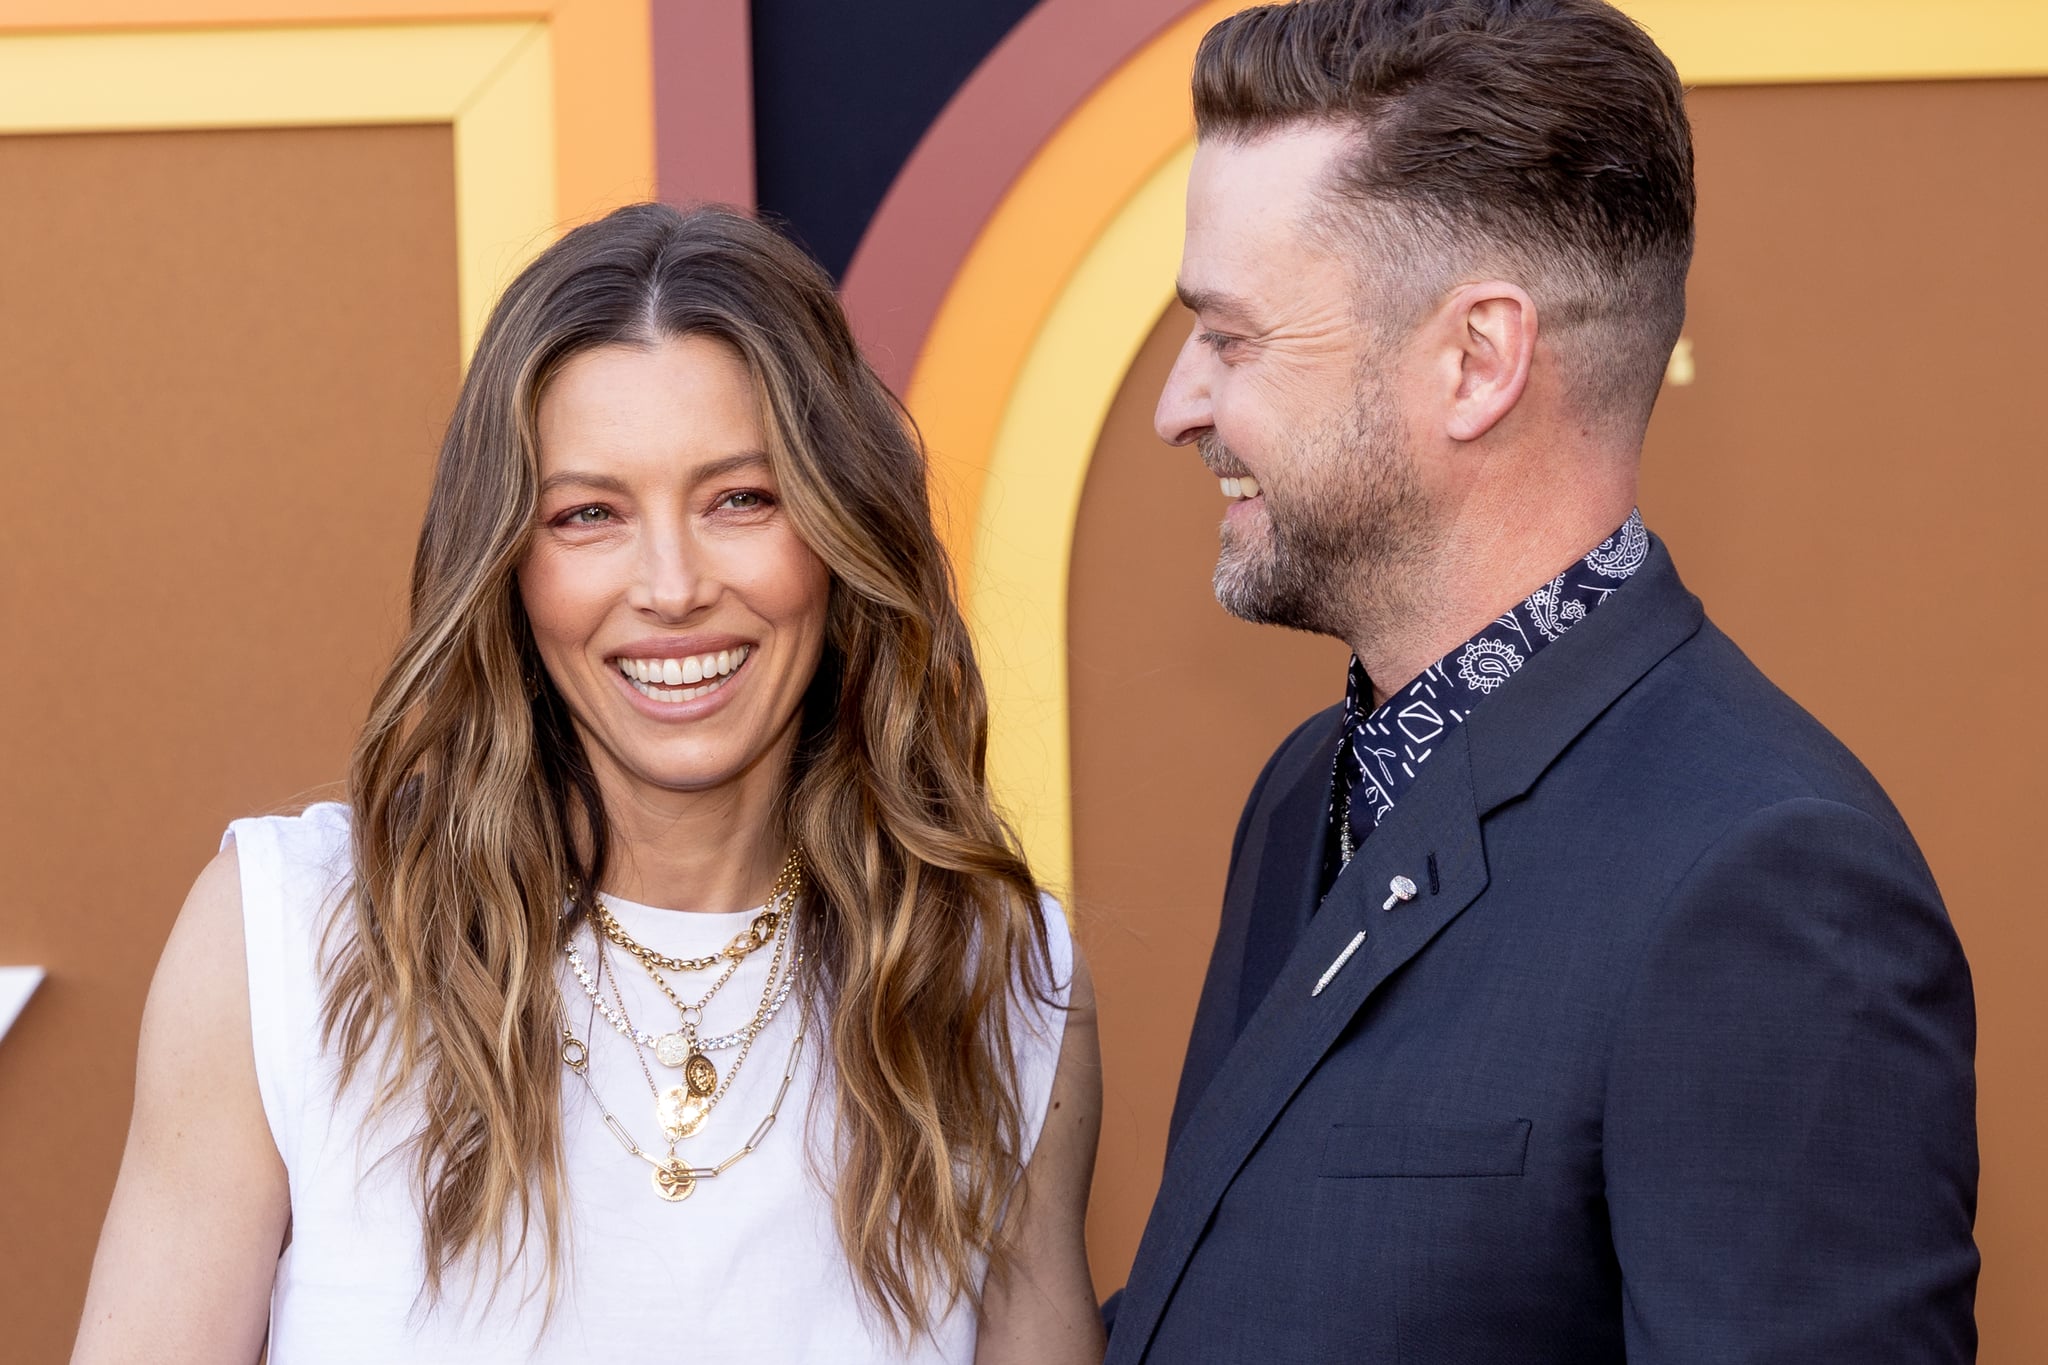 LOS ANGELES, CALIFORNIA - MAY 09: Jessica Biel and Justin Timberlake attend the Los Angeles premiere FYC event for Hulu's 'Candy' at El Capitan Theatre on May 09, 2022 in Los Angeles, California. (Photo by Emma McIntyre/WireImage)